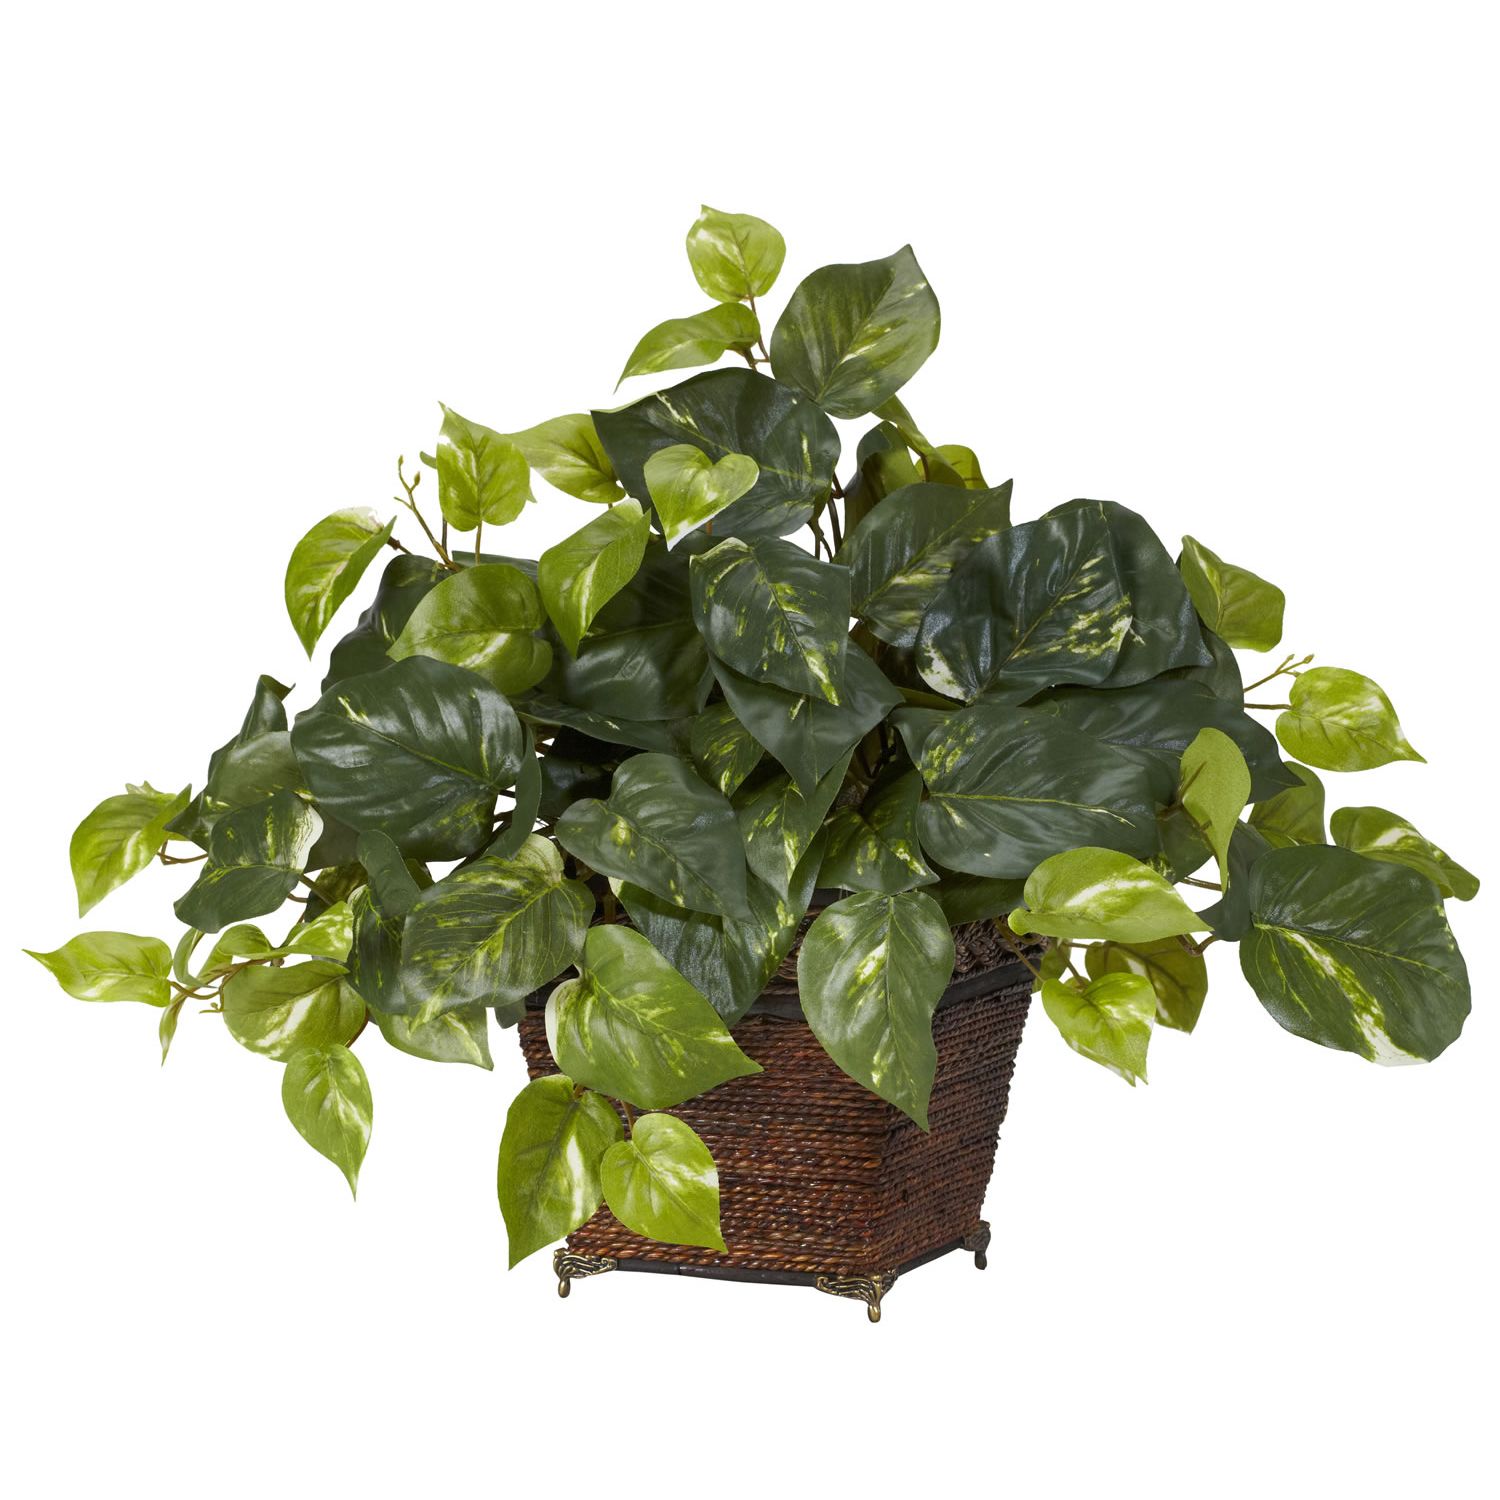 Bright Creations Artificial Ivy for DIY Crafts, Decor (5 Pack)